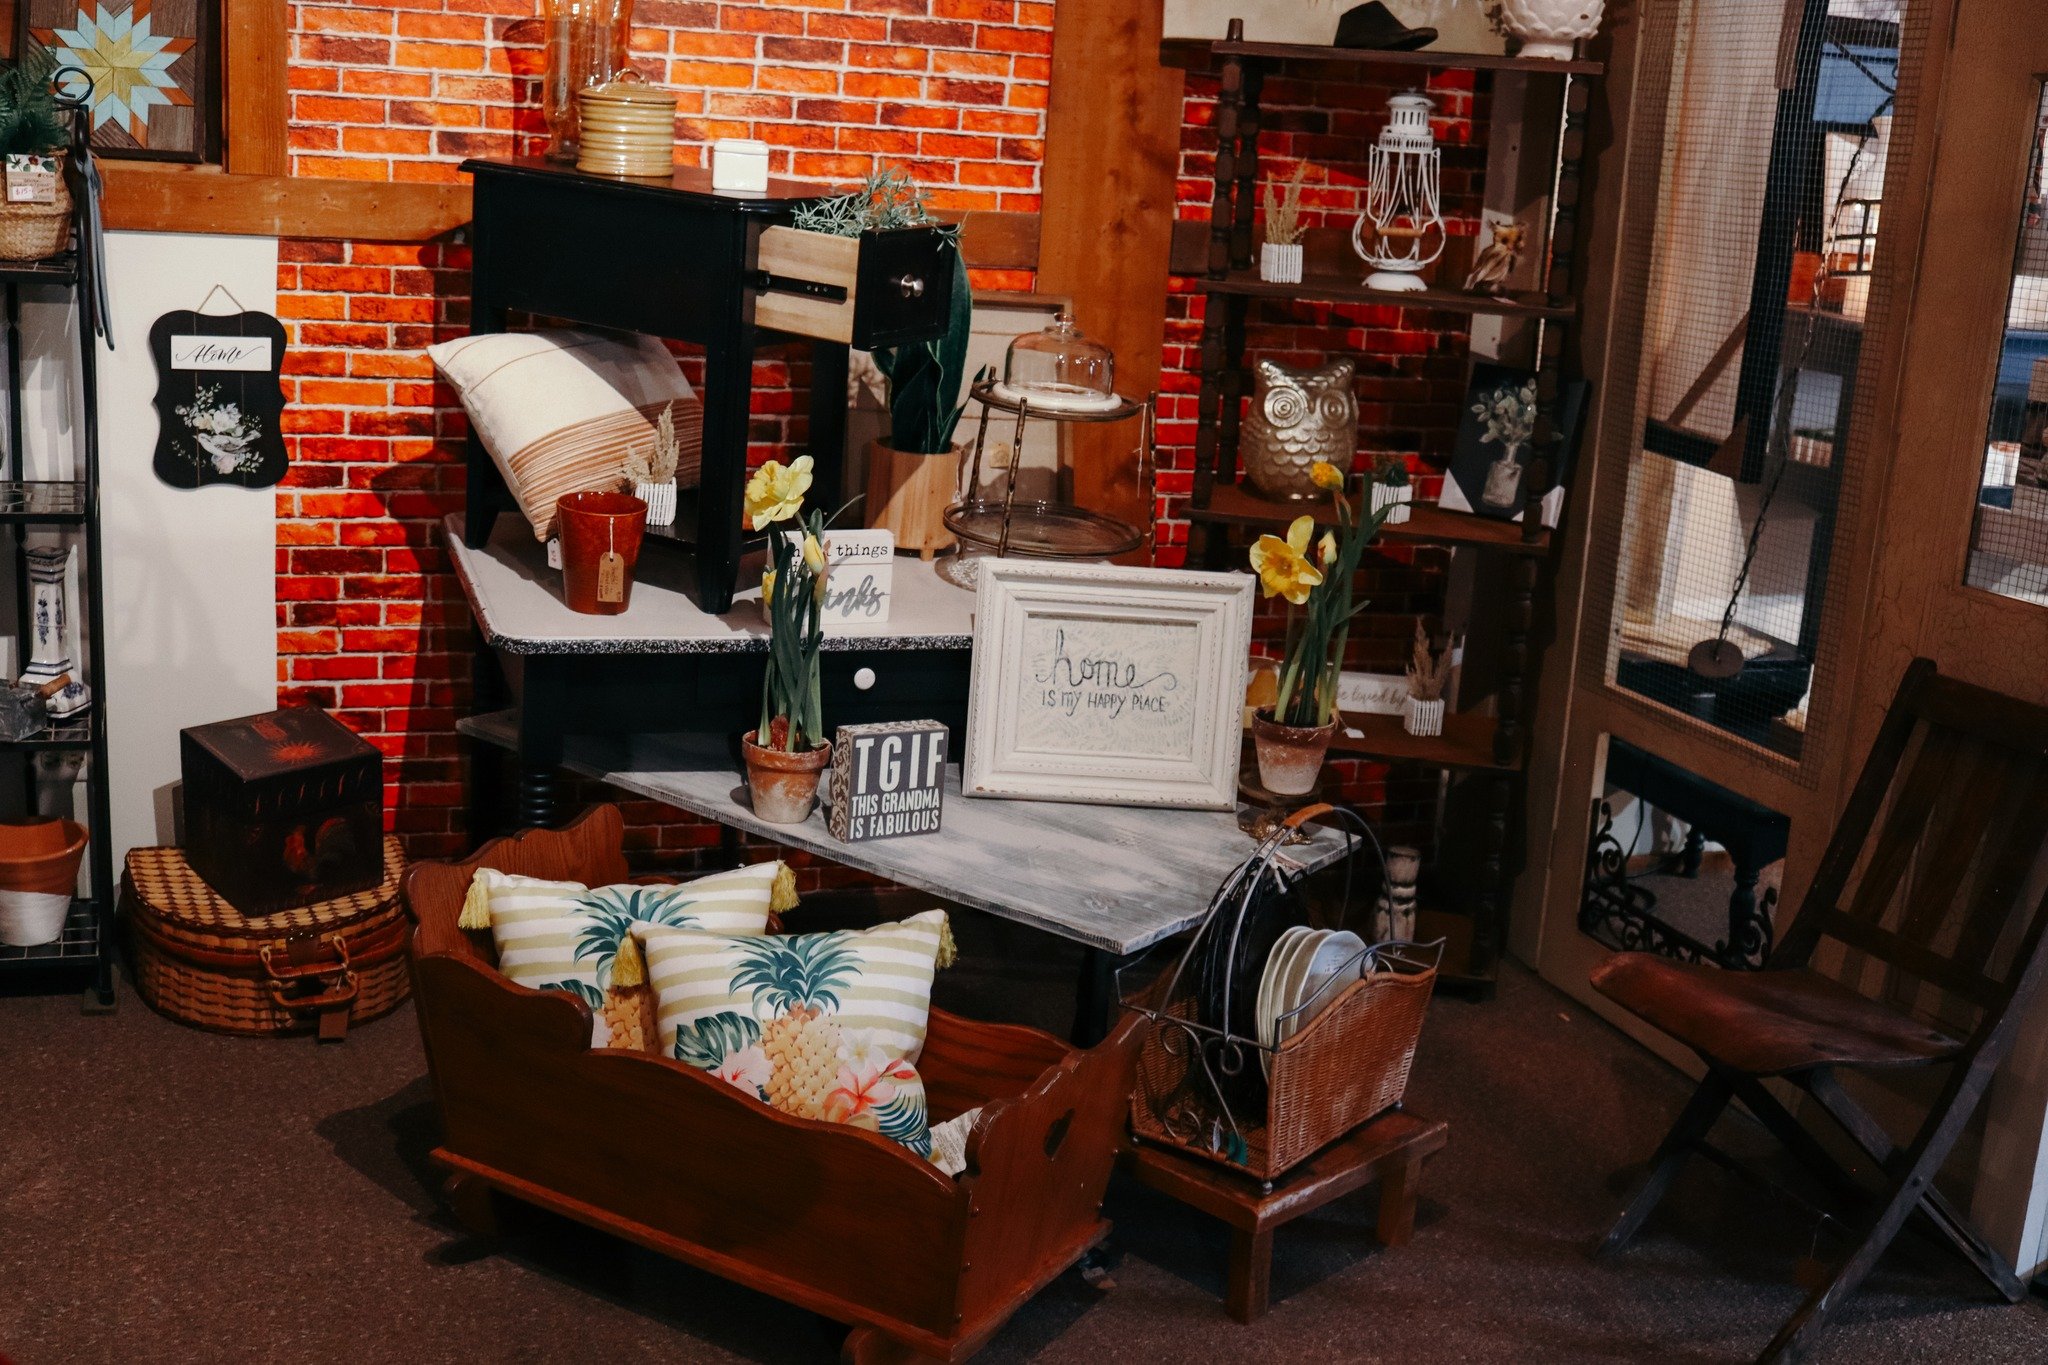 WE HAVE A WIDE SELECTION OF HOME GOODS!

Our charming 8,000 square foot space offers over 90+ small shops specializing in home d&eacute;cor, furniture, antiques, rustic accents, and more. Snag a friend and visit us today from 10AM - 4PM to find new p